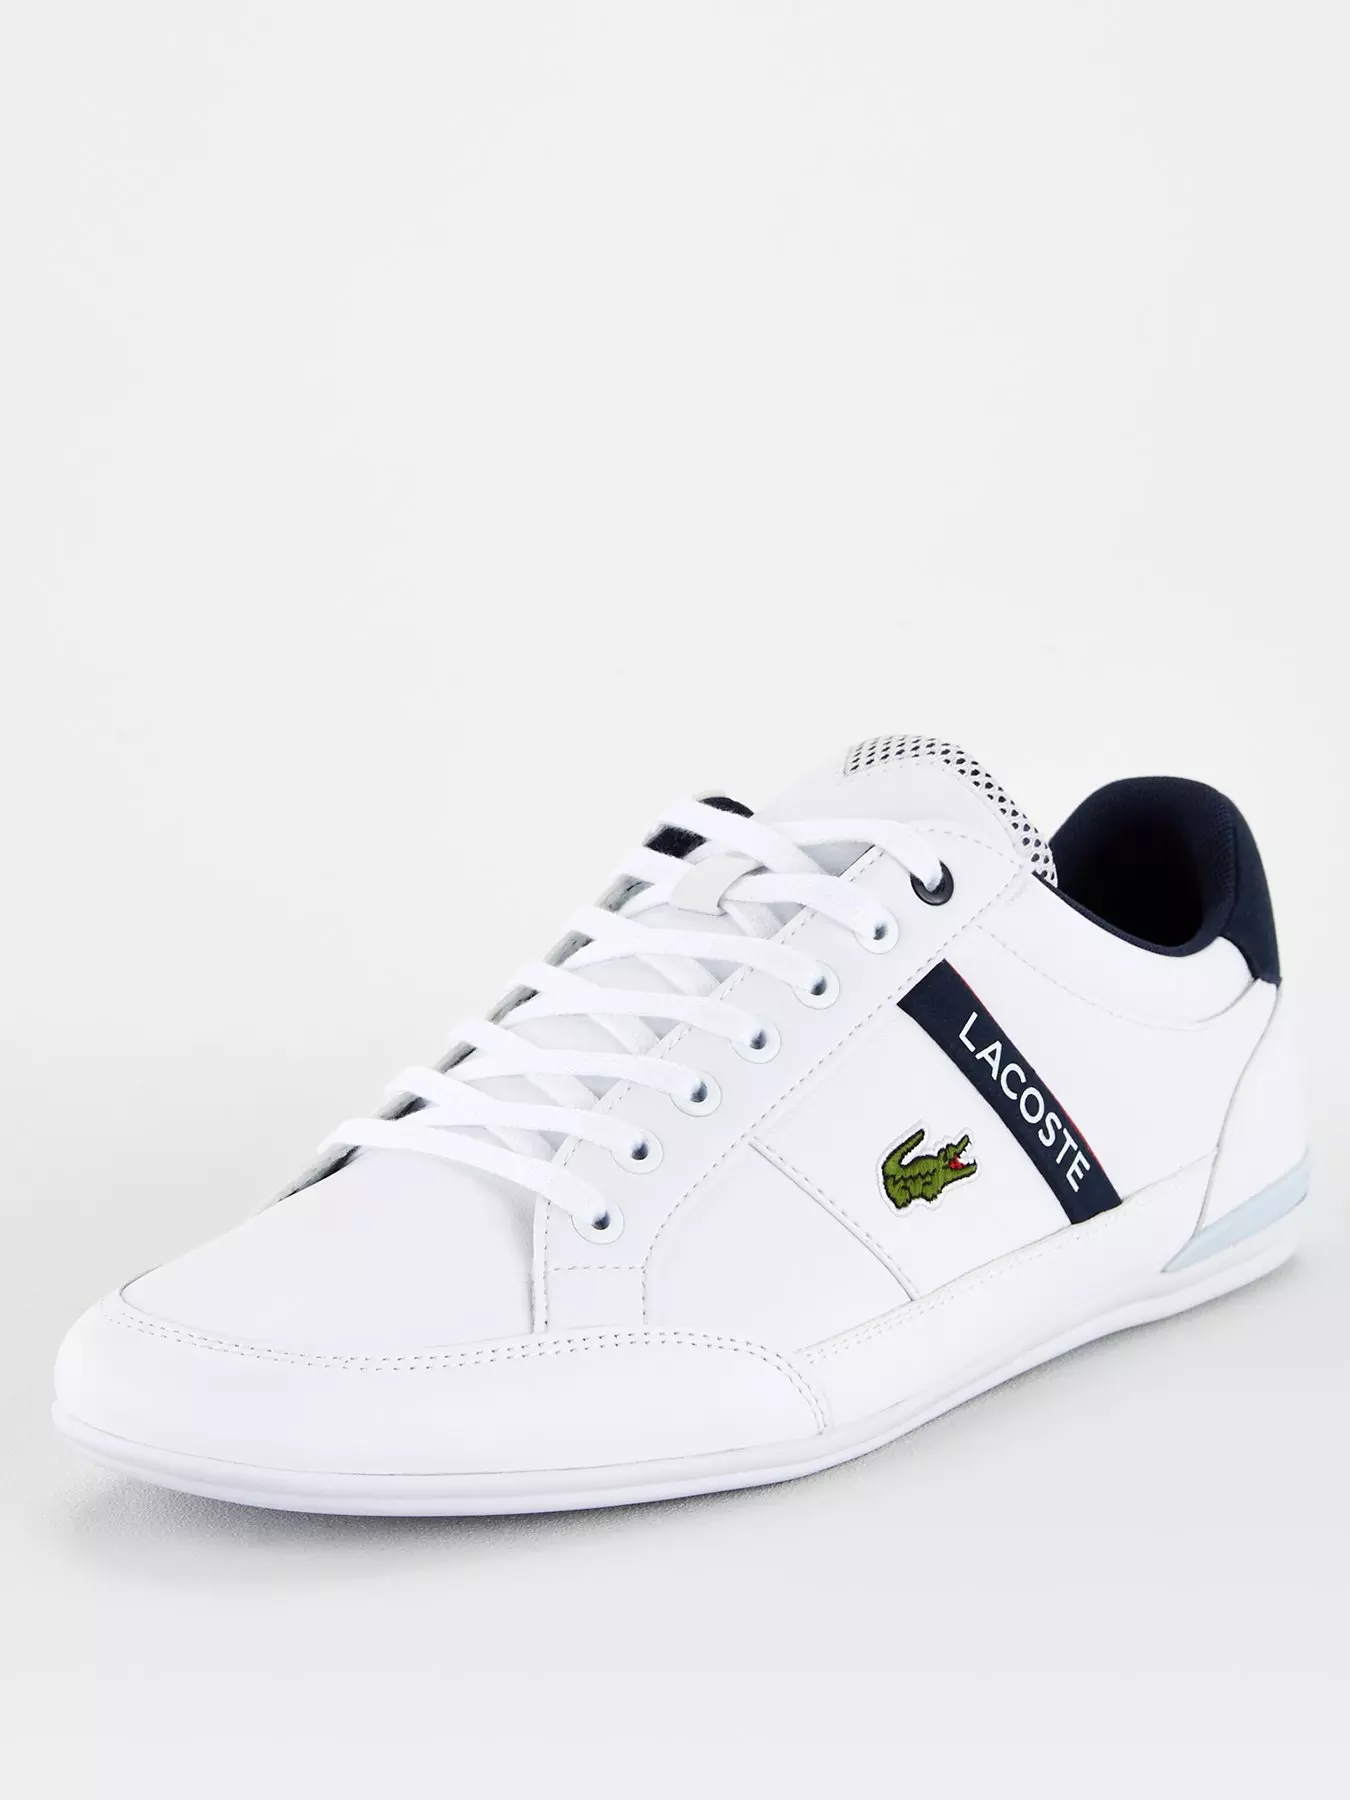 Hick Darmen Voorstel Lacoste Shoes | Free Delivery | Very Ireland